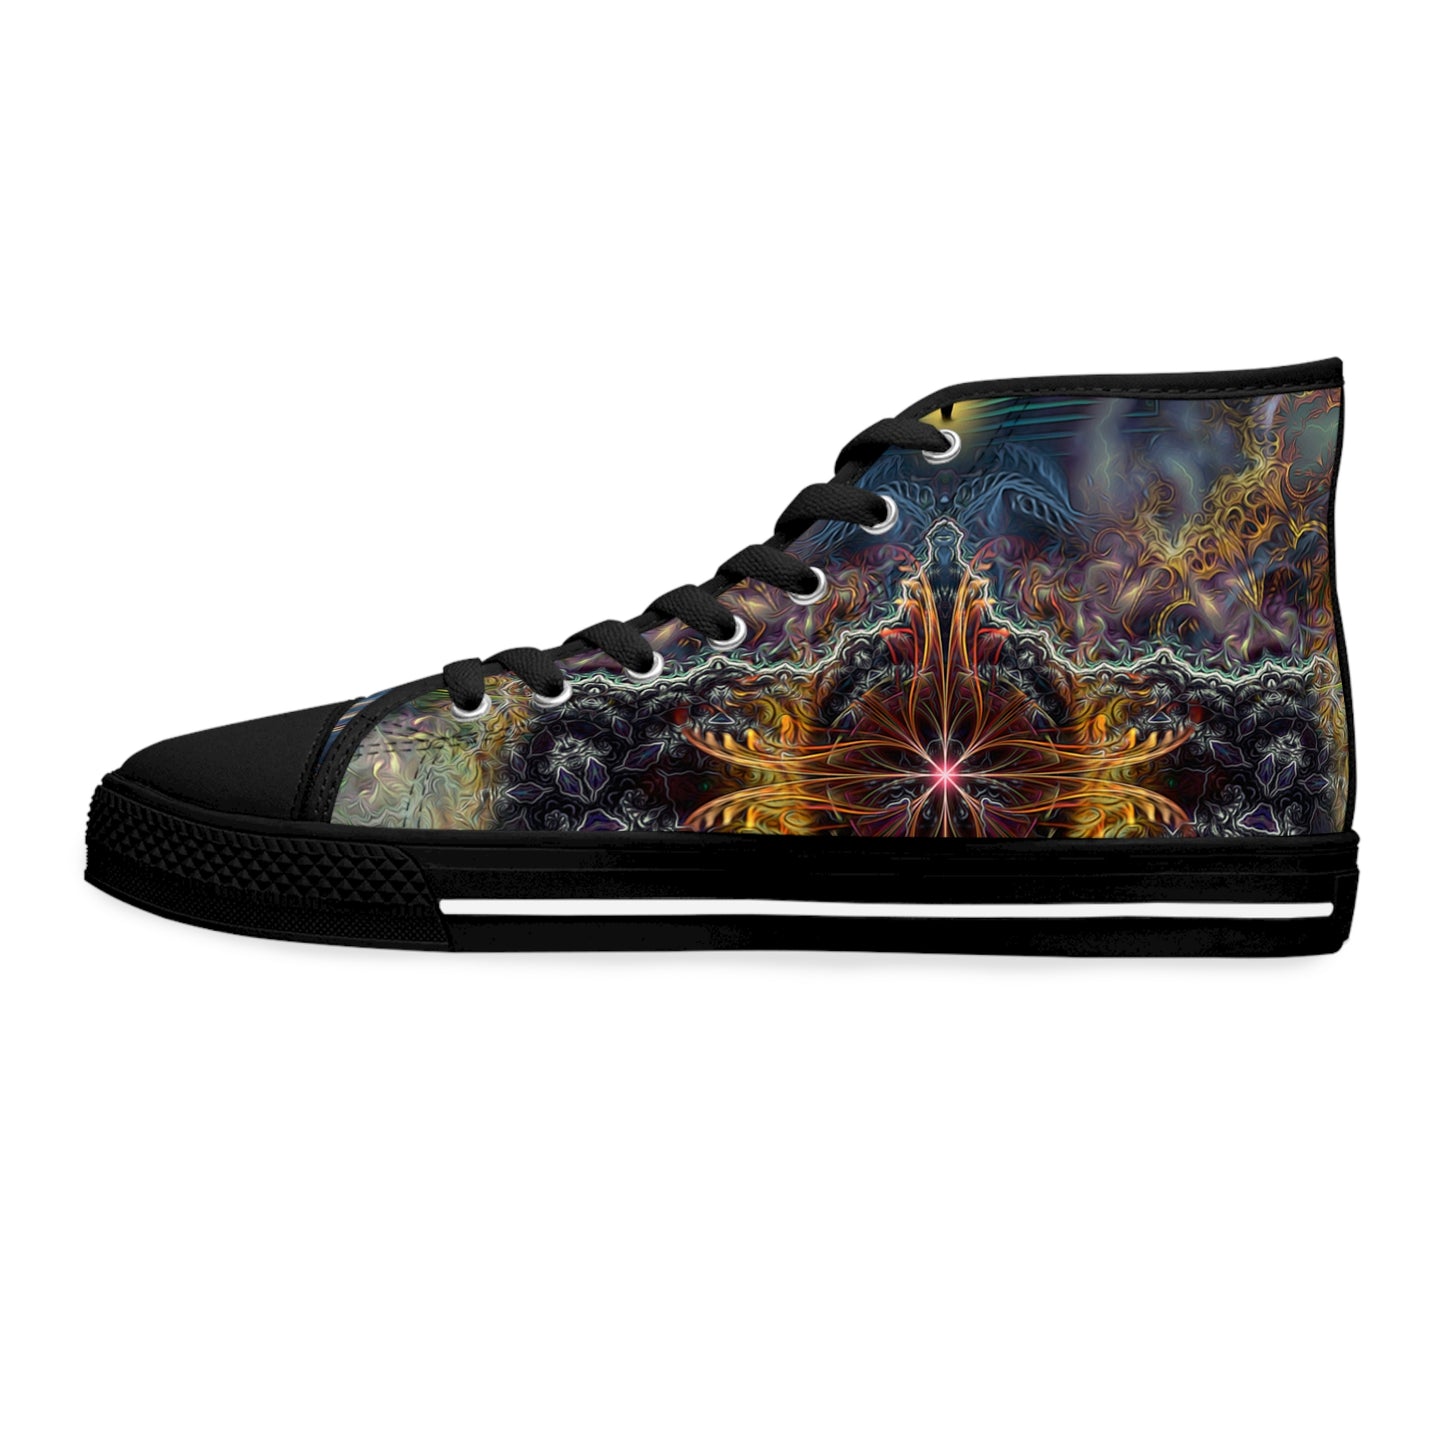 "Heightened Stroll V2" WOMEN'S HIGH TOP SNEAKERS